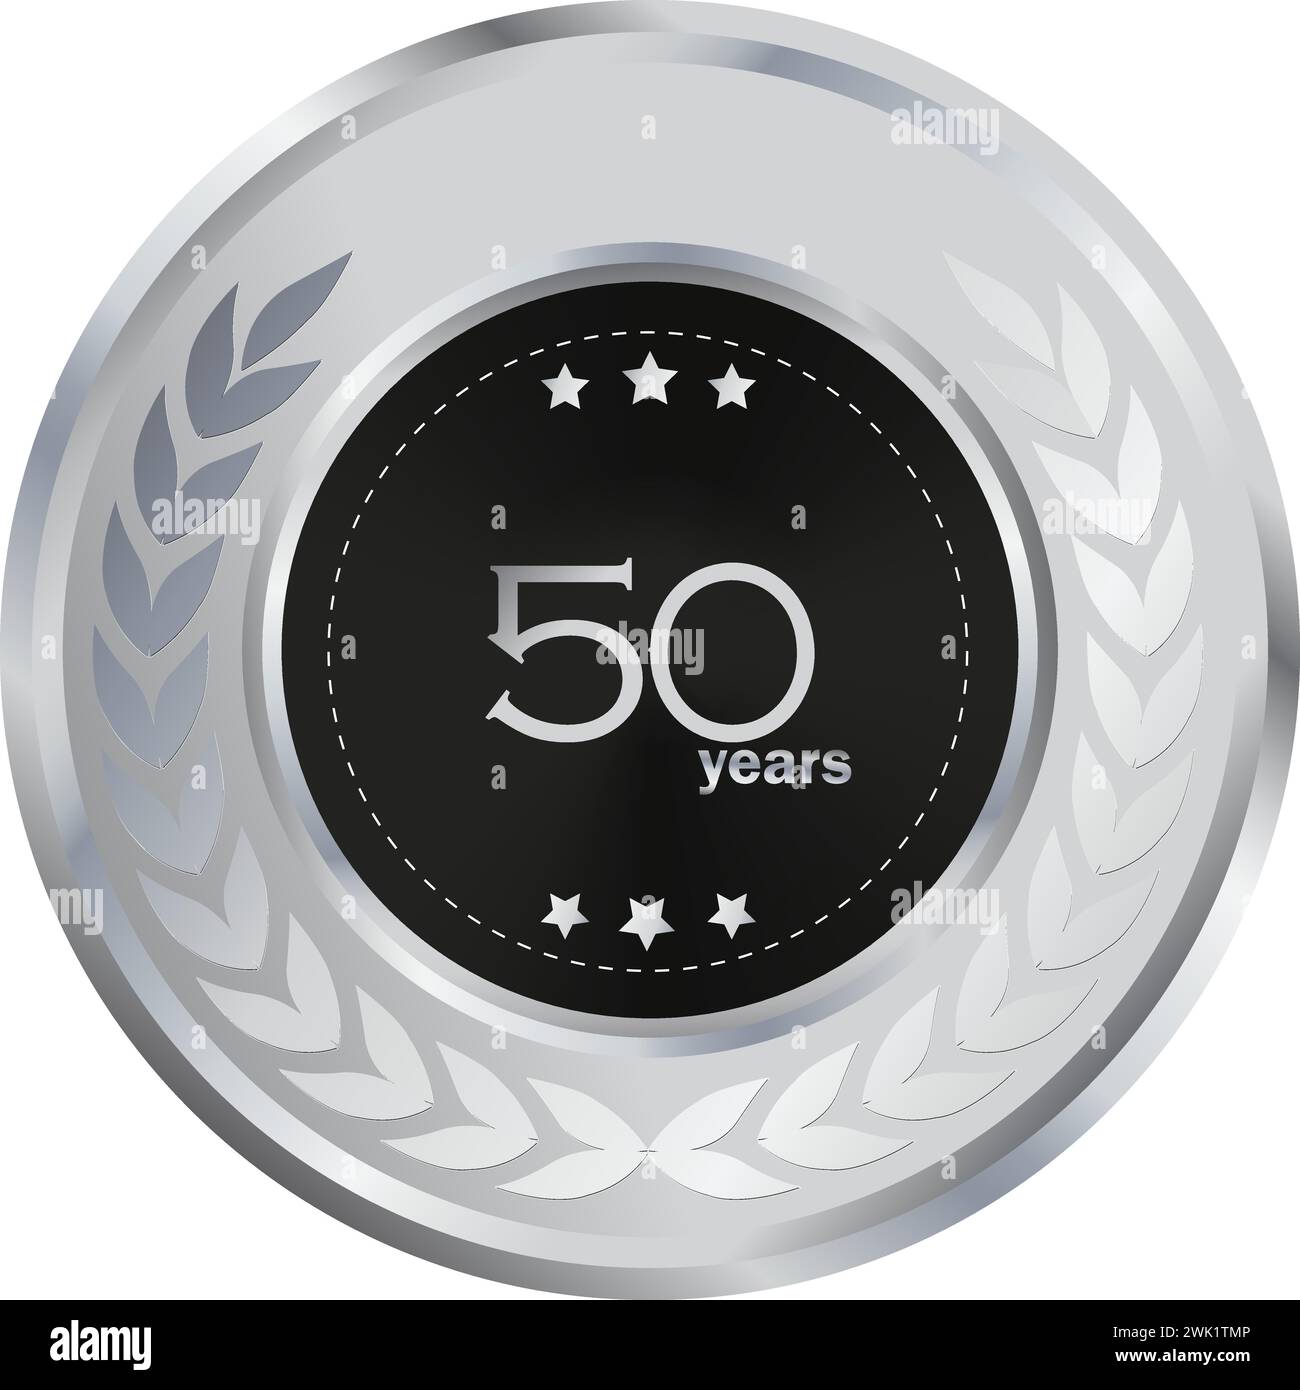 50th anniversary in Silver and Black, anniversary gift, 50th Year Anniversary Celebrating, Silver seal, Silver ring, birthday celebration Stock Vector